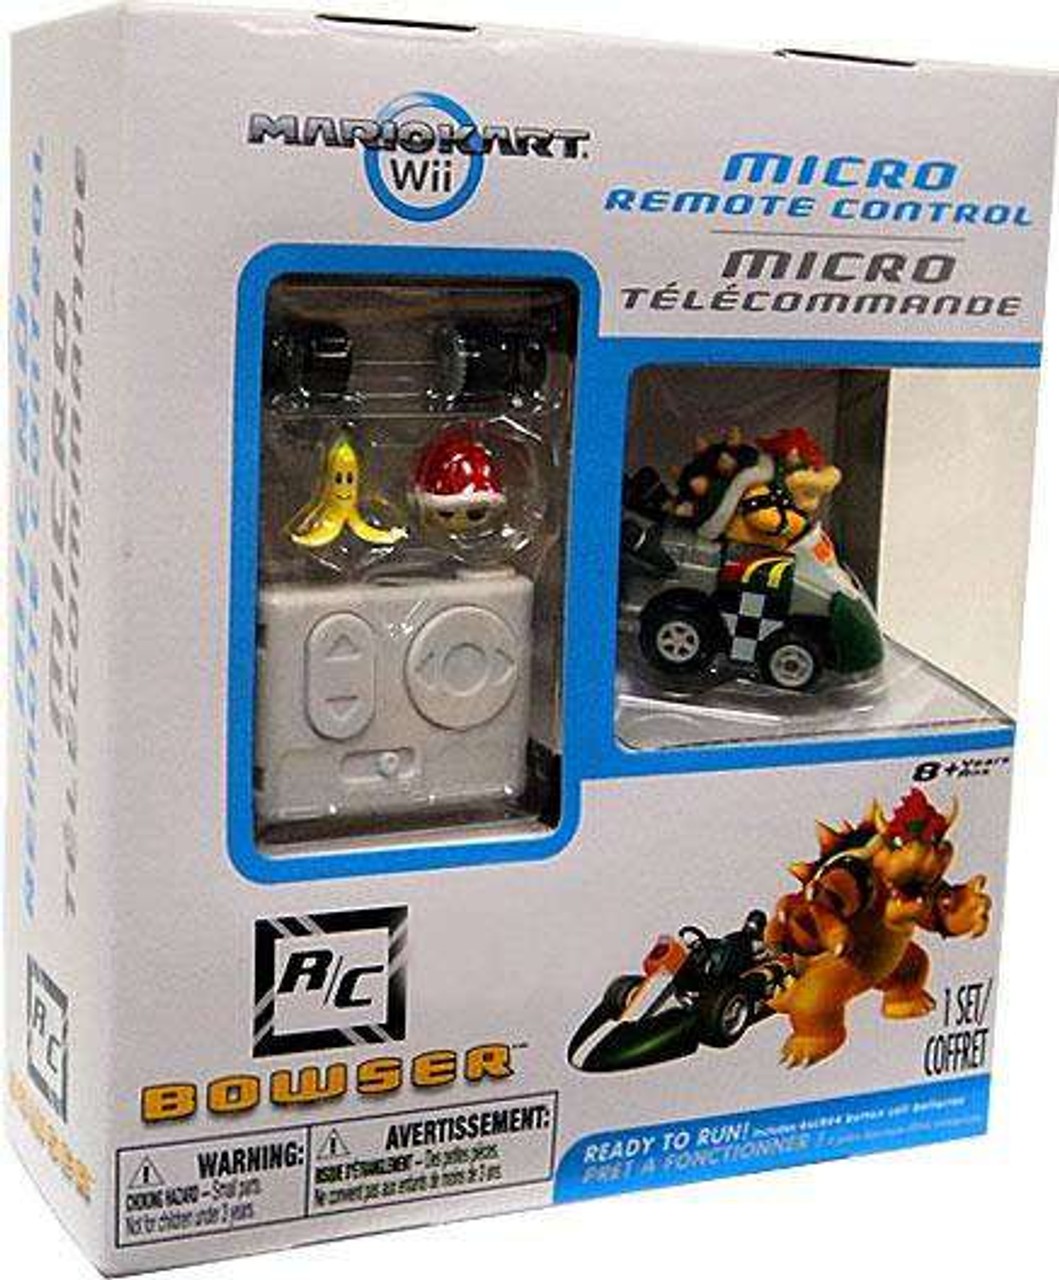 Super Mario Mario Kart Wii Micro Remote Control Bowser Exclusive Rc Vehicle Spin Master Toywiz 0749